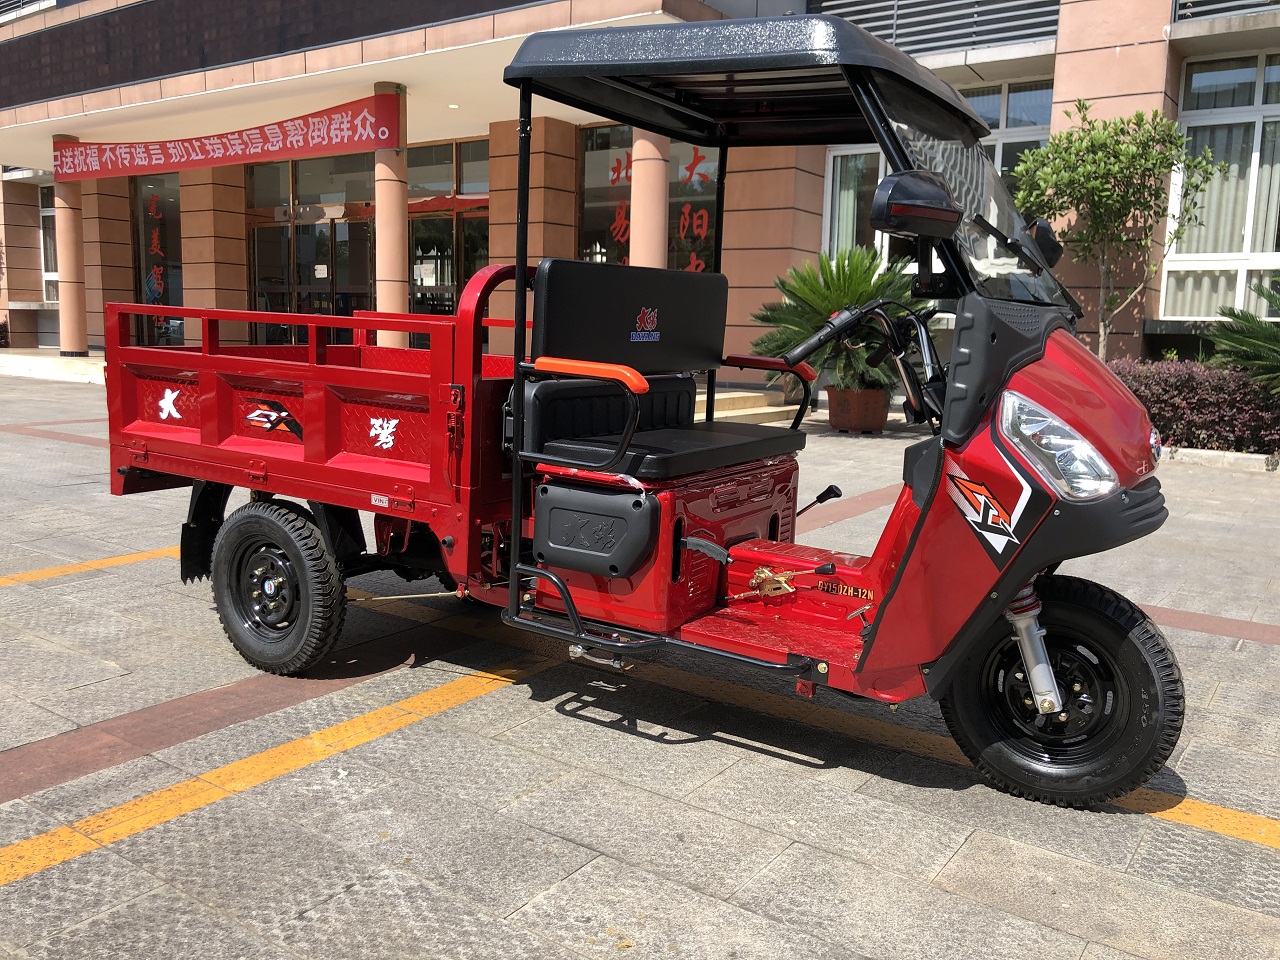 High cost performance well sell truck tricycle motors corporation 200 cc gh for selling motorized tricycles moteur gazoil